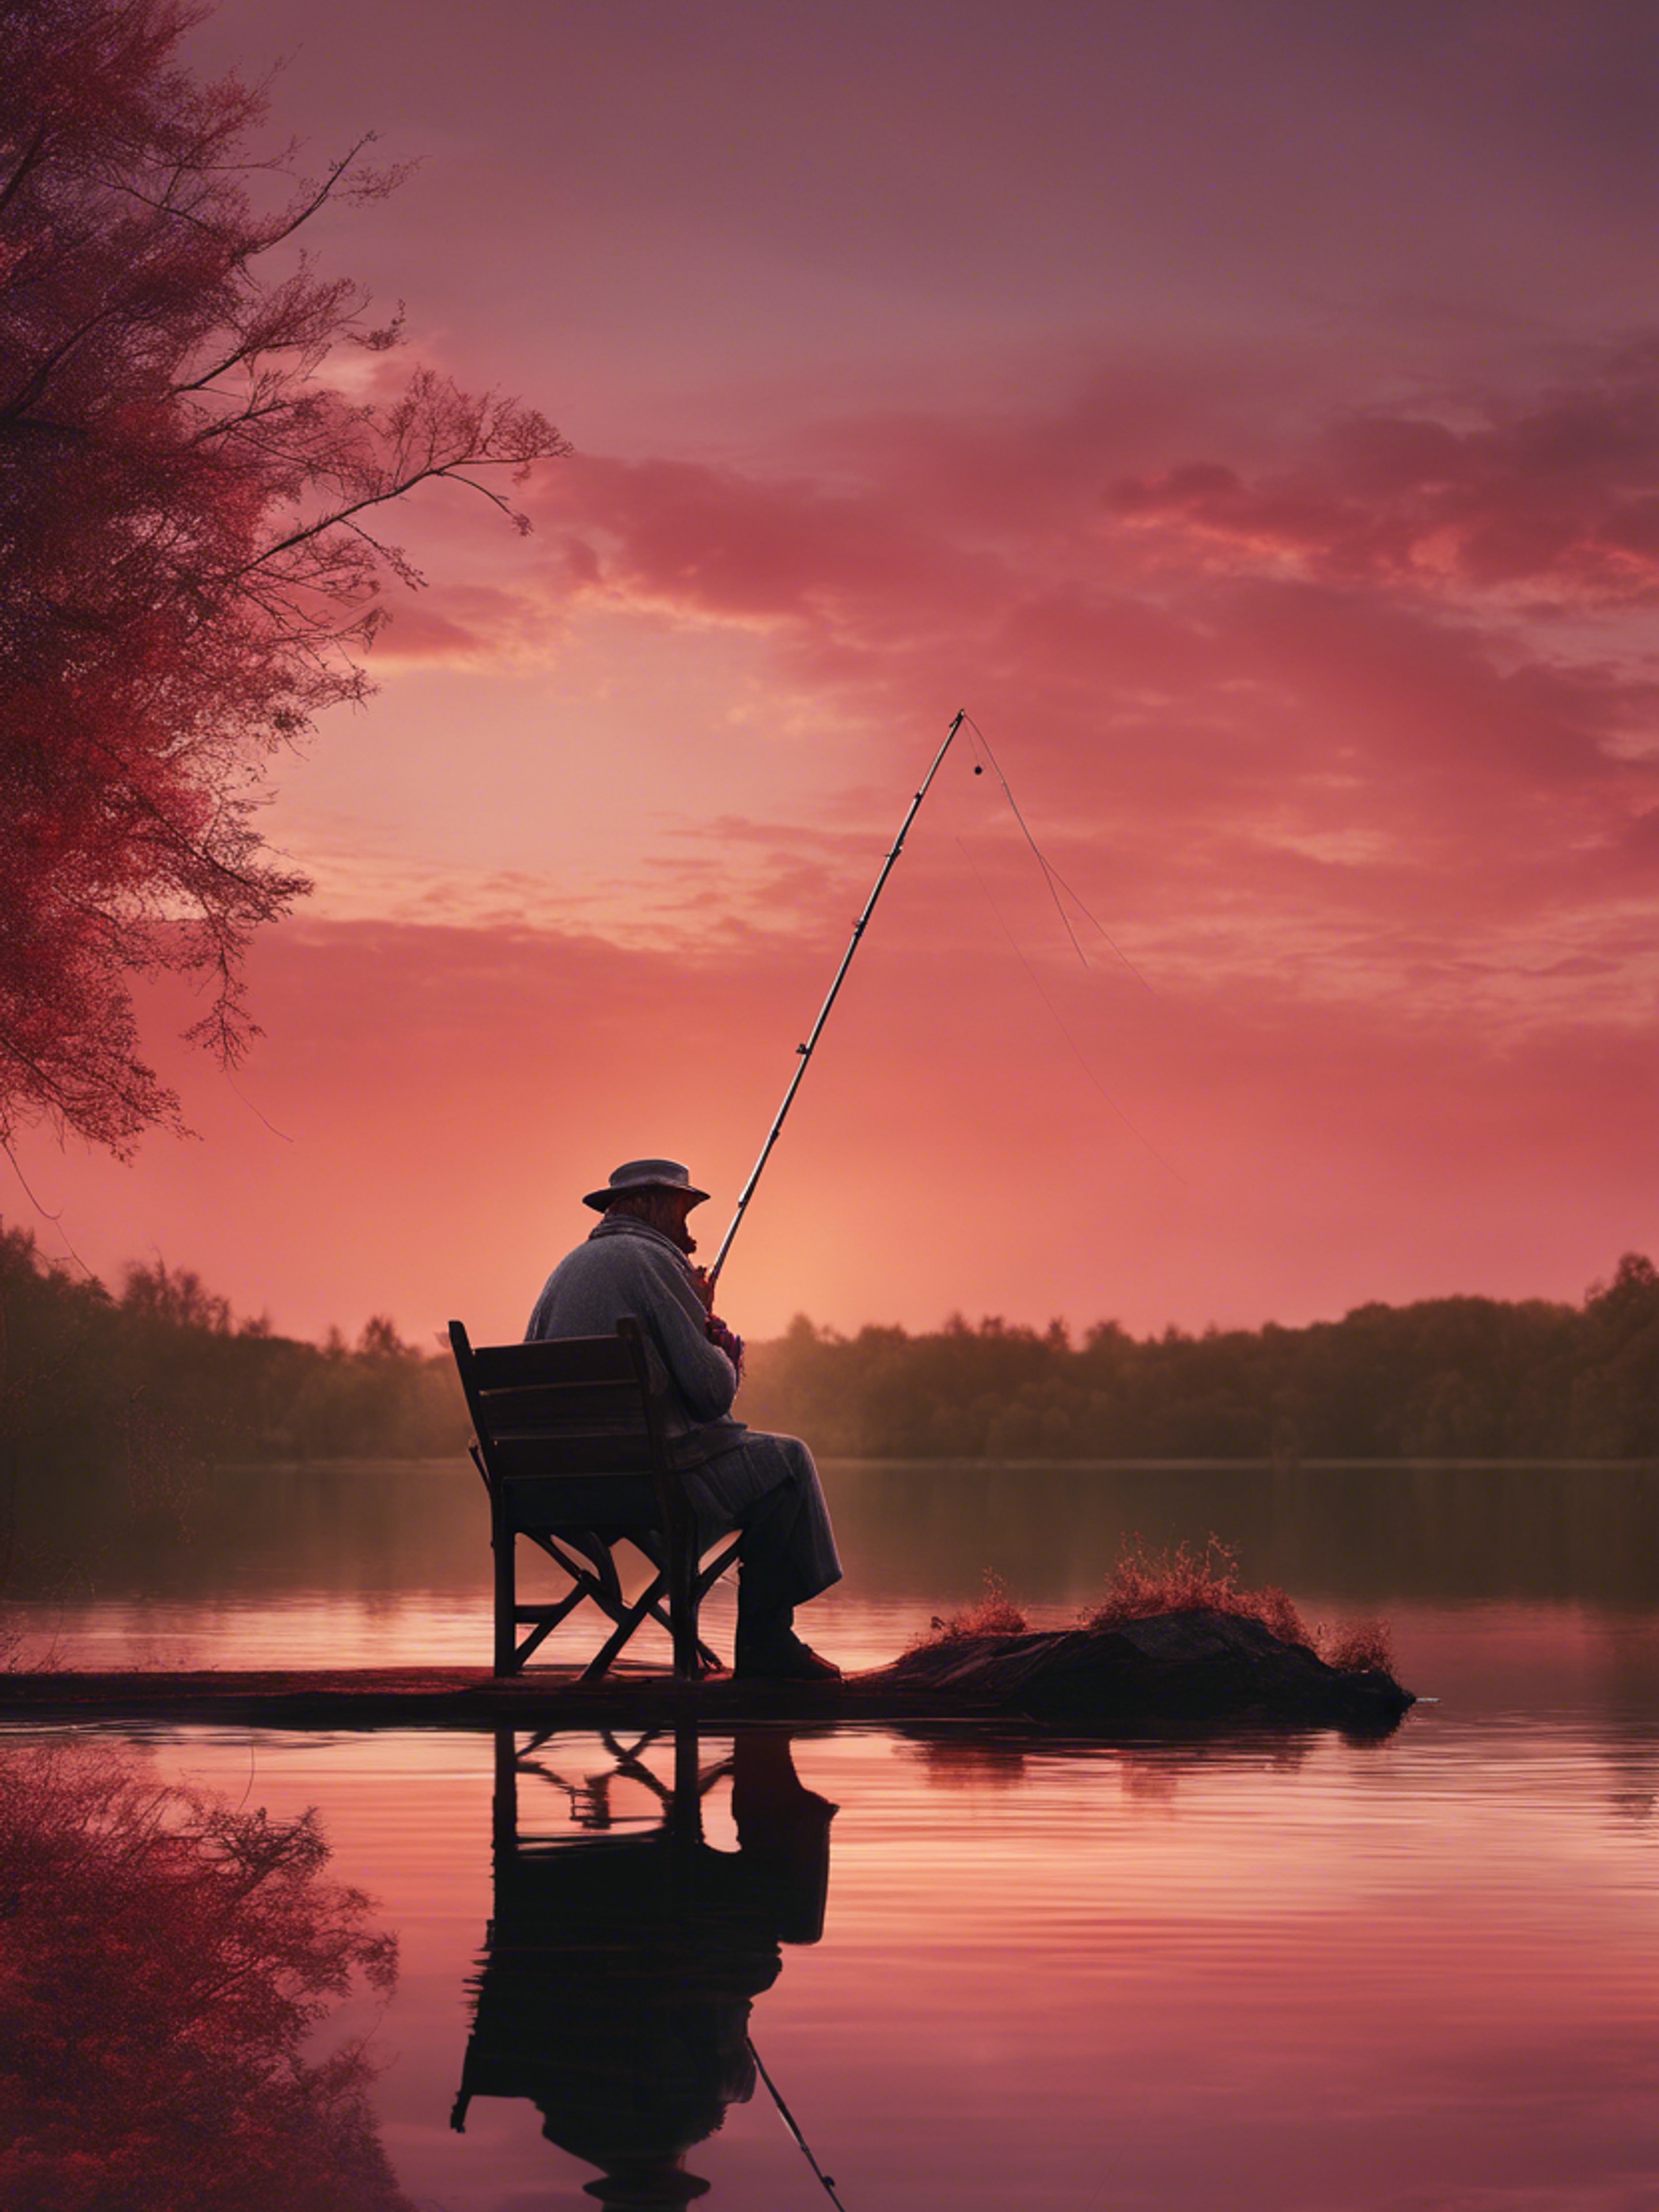 An old man maintaining a lonely vigil beside a lake under a ruby-red sunset, a fishing rod in his hand. Hintergrund[4b1db37a85dd45b294cb]